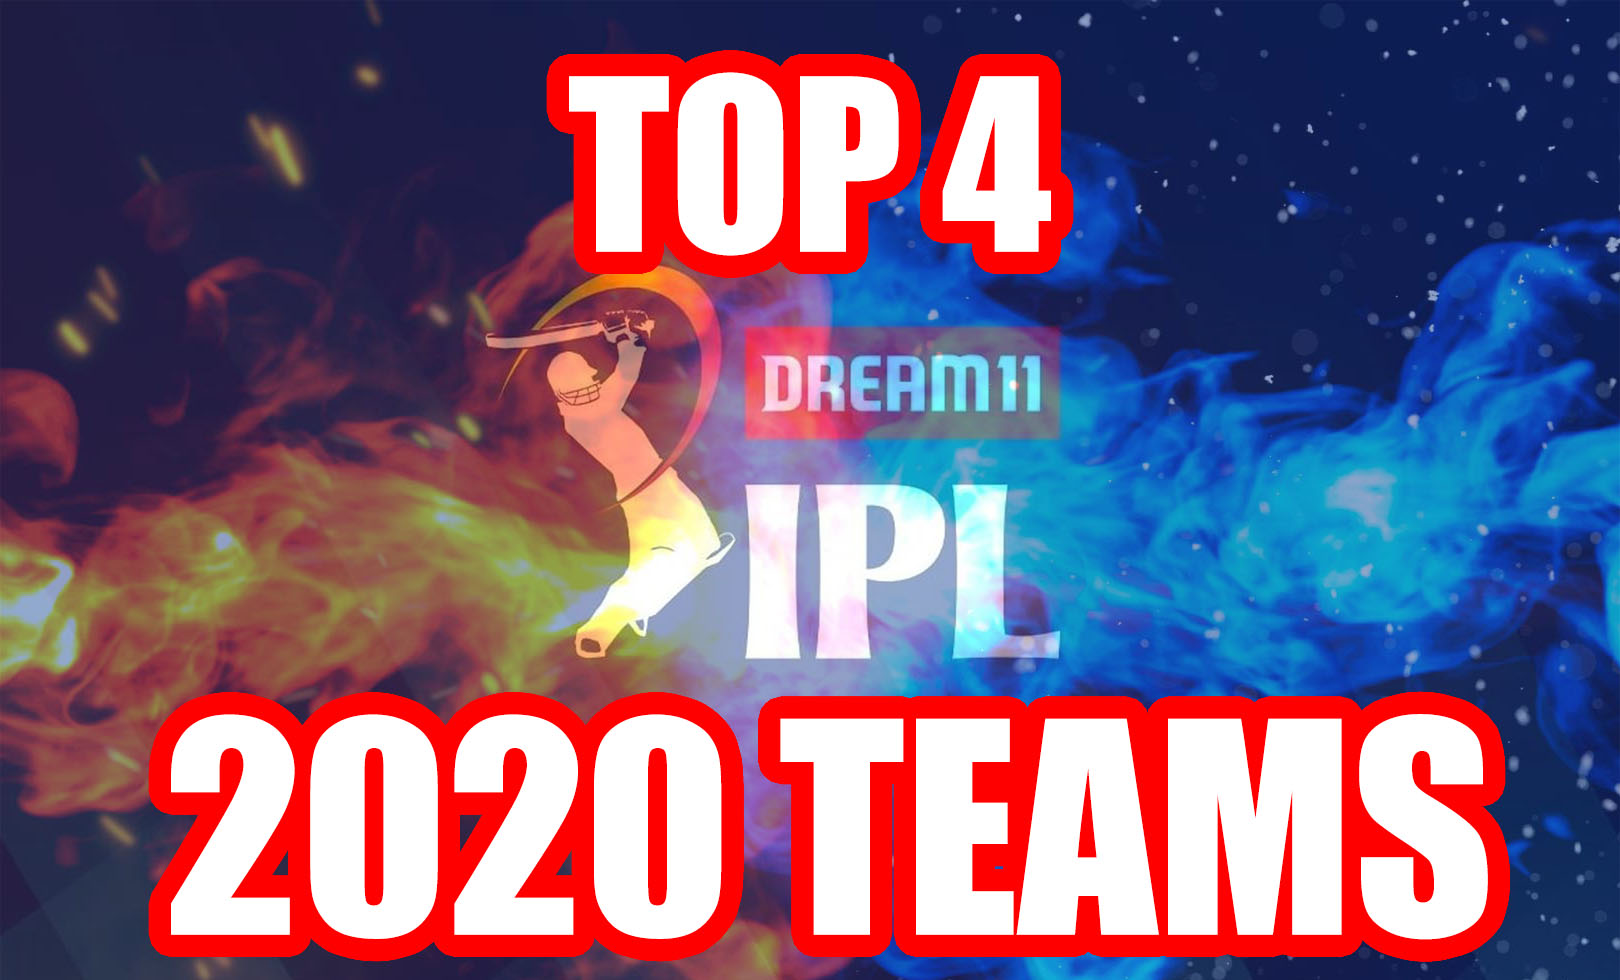 IPL 2021 Analysis: Strongest Team on Point Table Predicted, Top 4 Teams for Playoffs